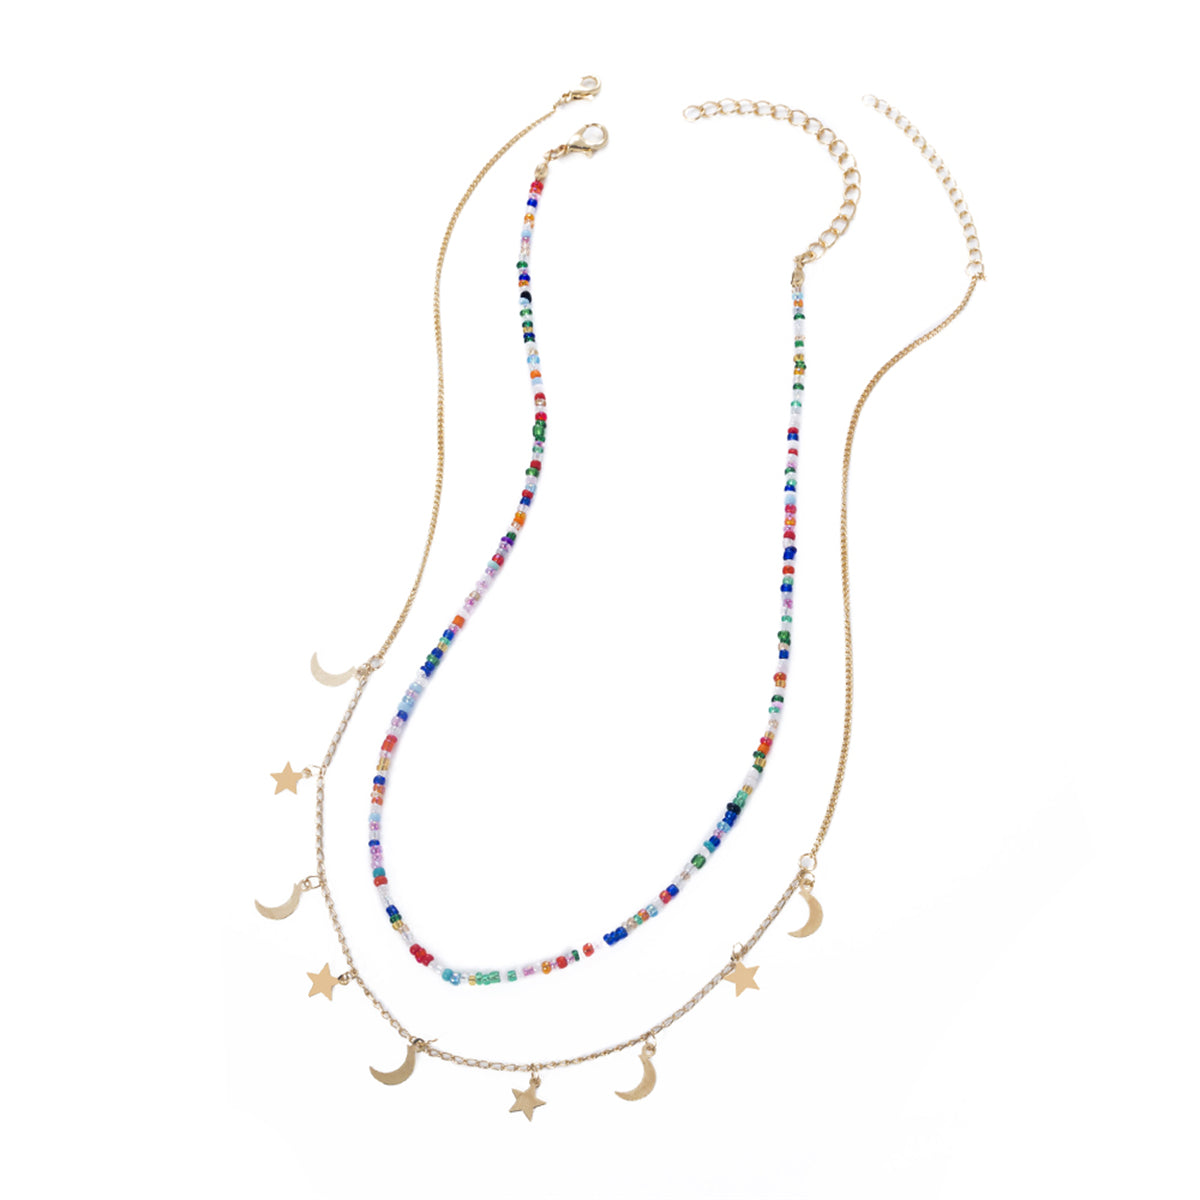 Blue & Red Acrylic Beaded Necklace & 18K Gold-Plated Celestial Pendant Necklace Set